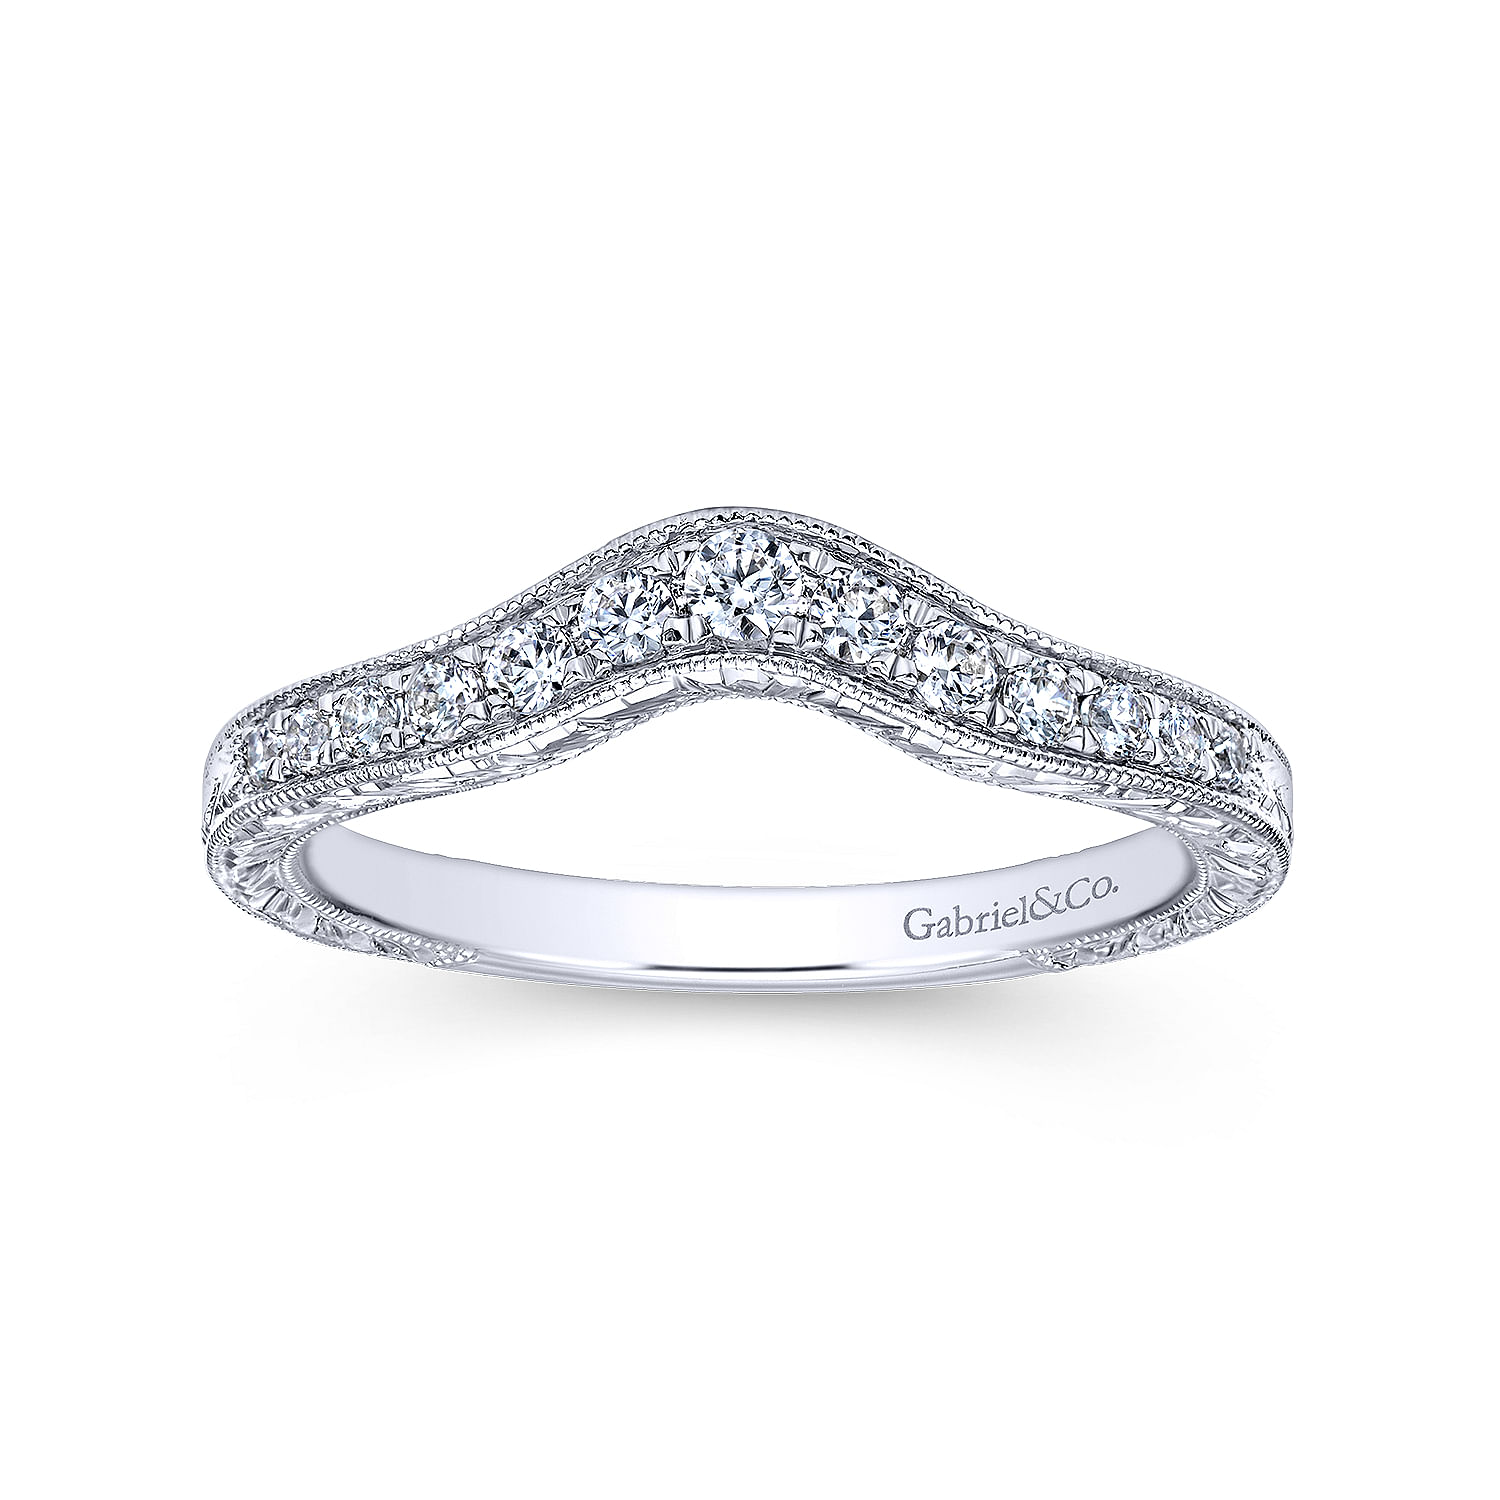 Vintage Inspired Curved 14K White Gold Diamond Wedding Band with Engraving